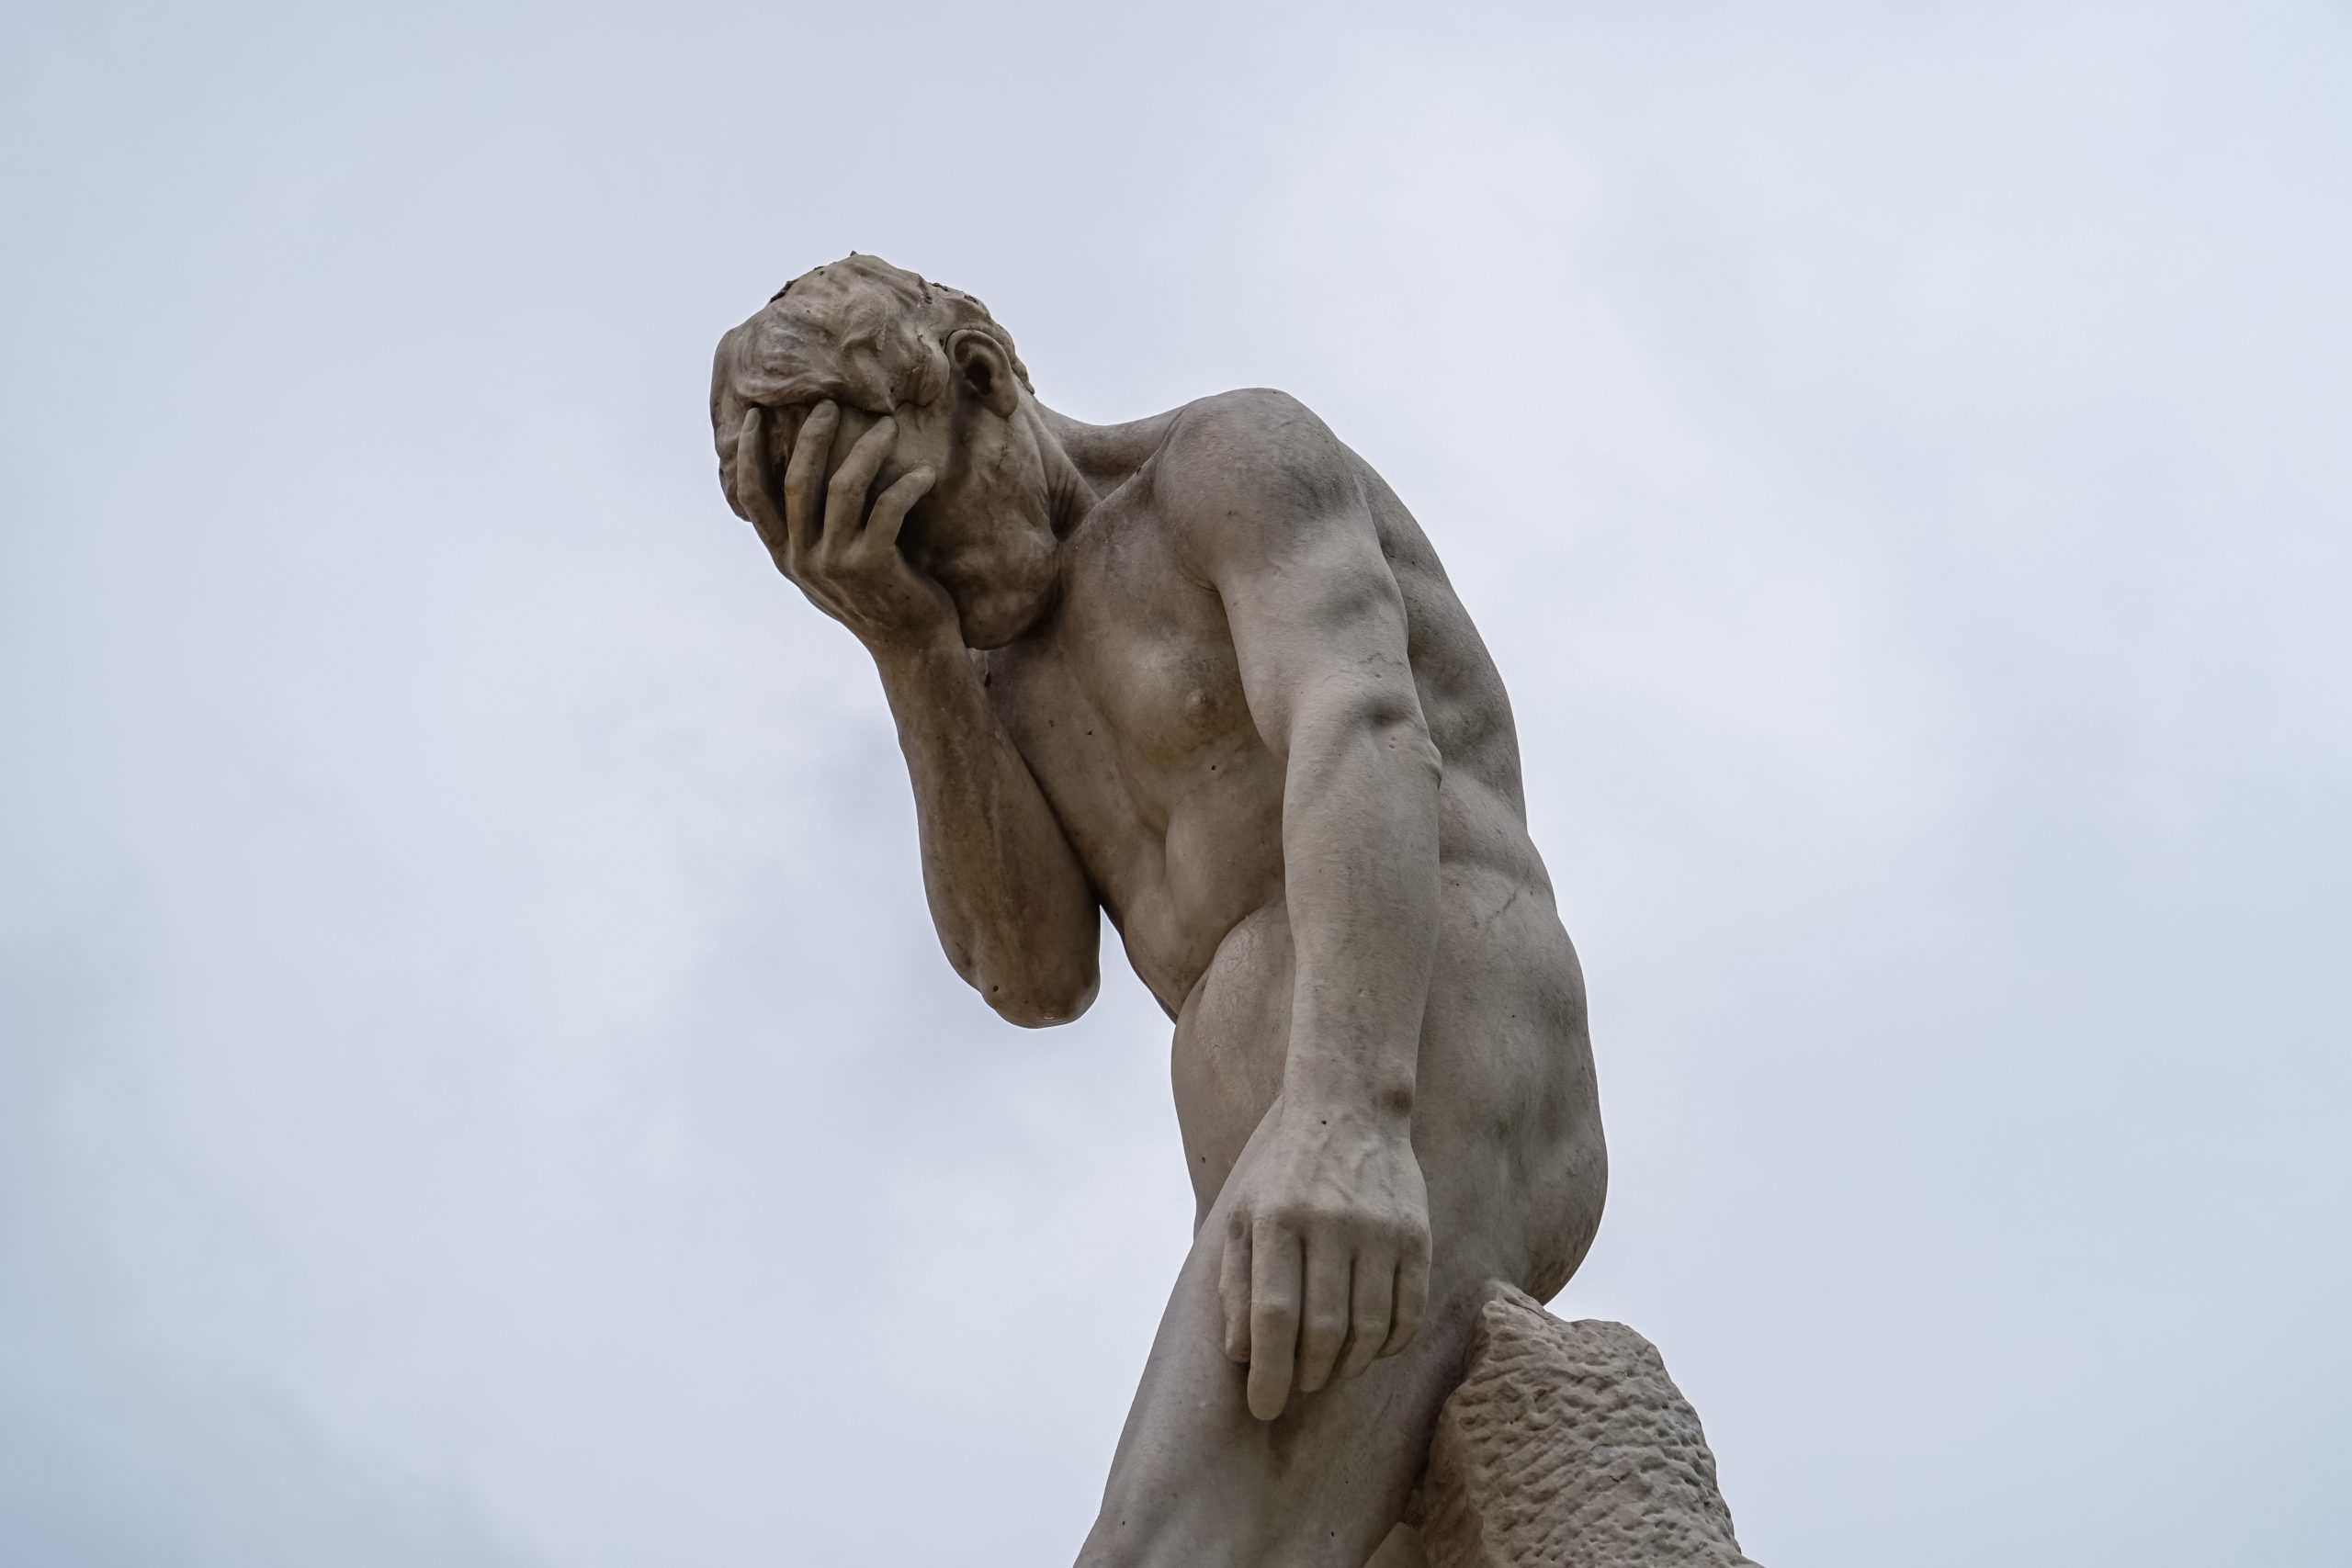 A statue doing the facepalm gesture